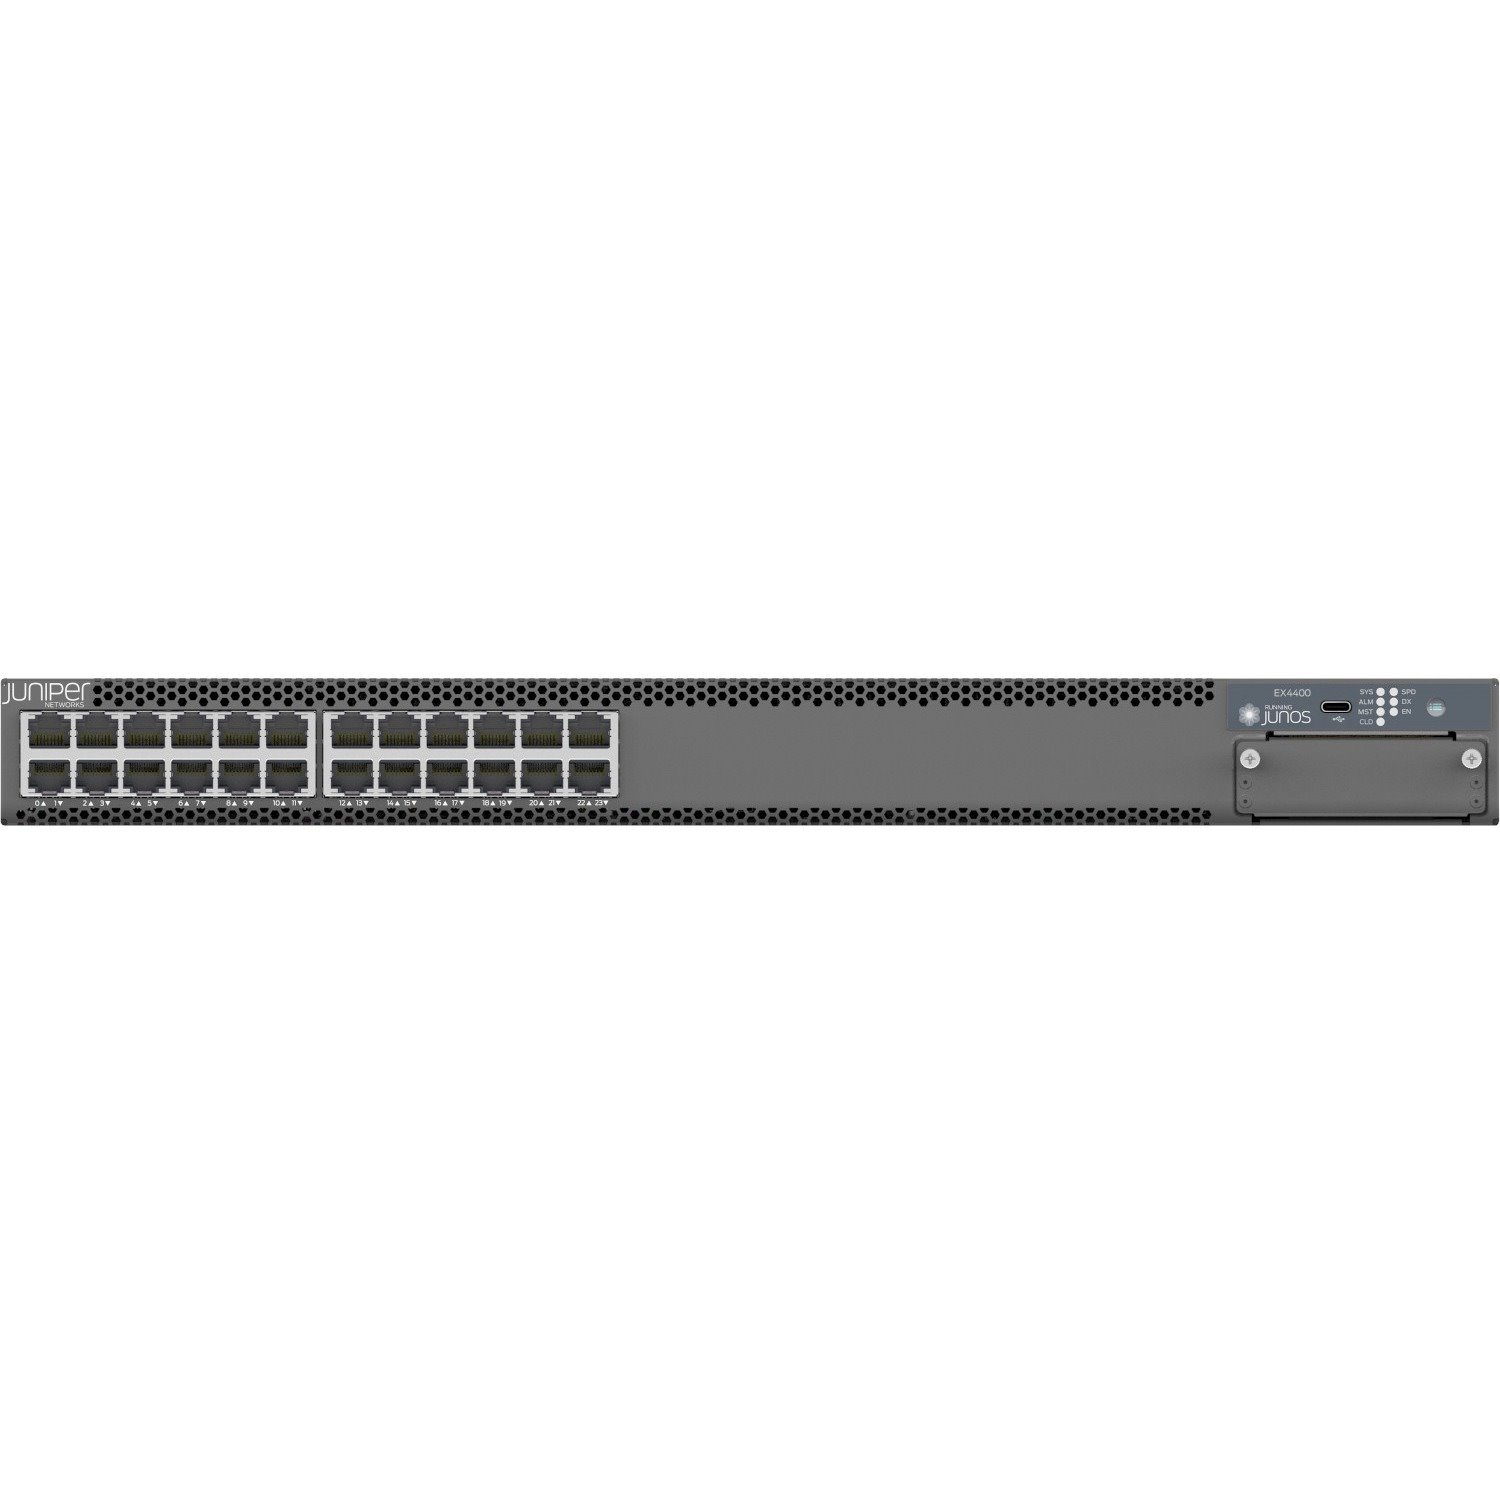 Juniper EX4400 EX4400-24T 24 Ports Manageable Ethernet Switch - Gigabit Ethernet, 25 Gigabit Ethernet, 100 Gigabit Ethernet - 10/100/1000Base-T, 25GBase-X, 100GBase-X